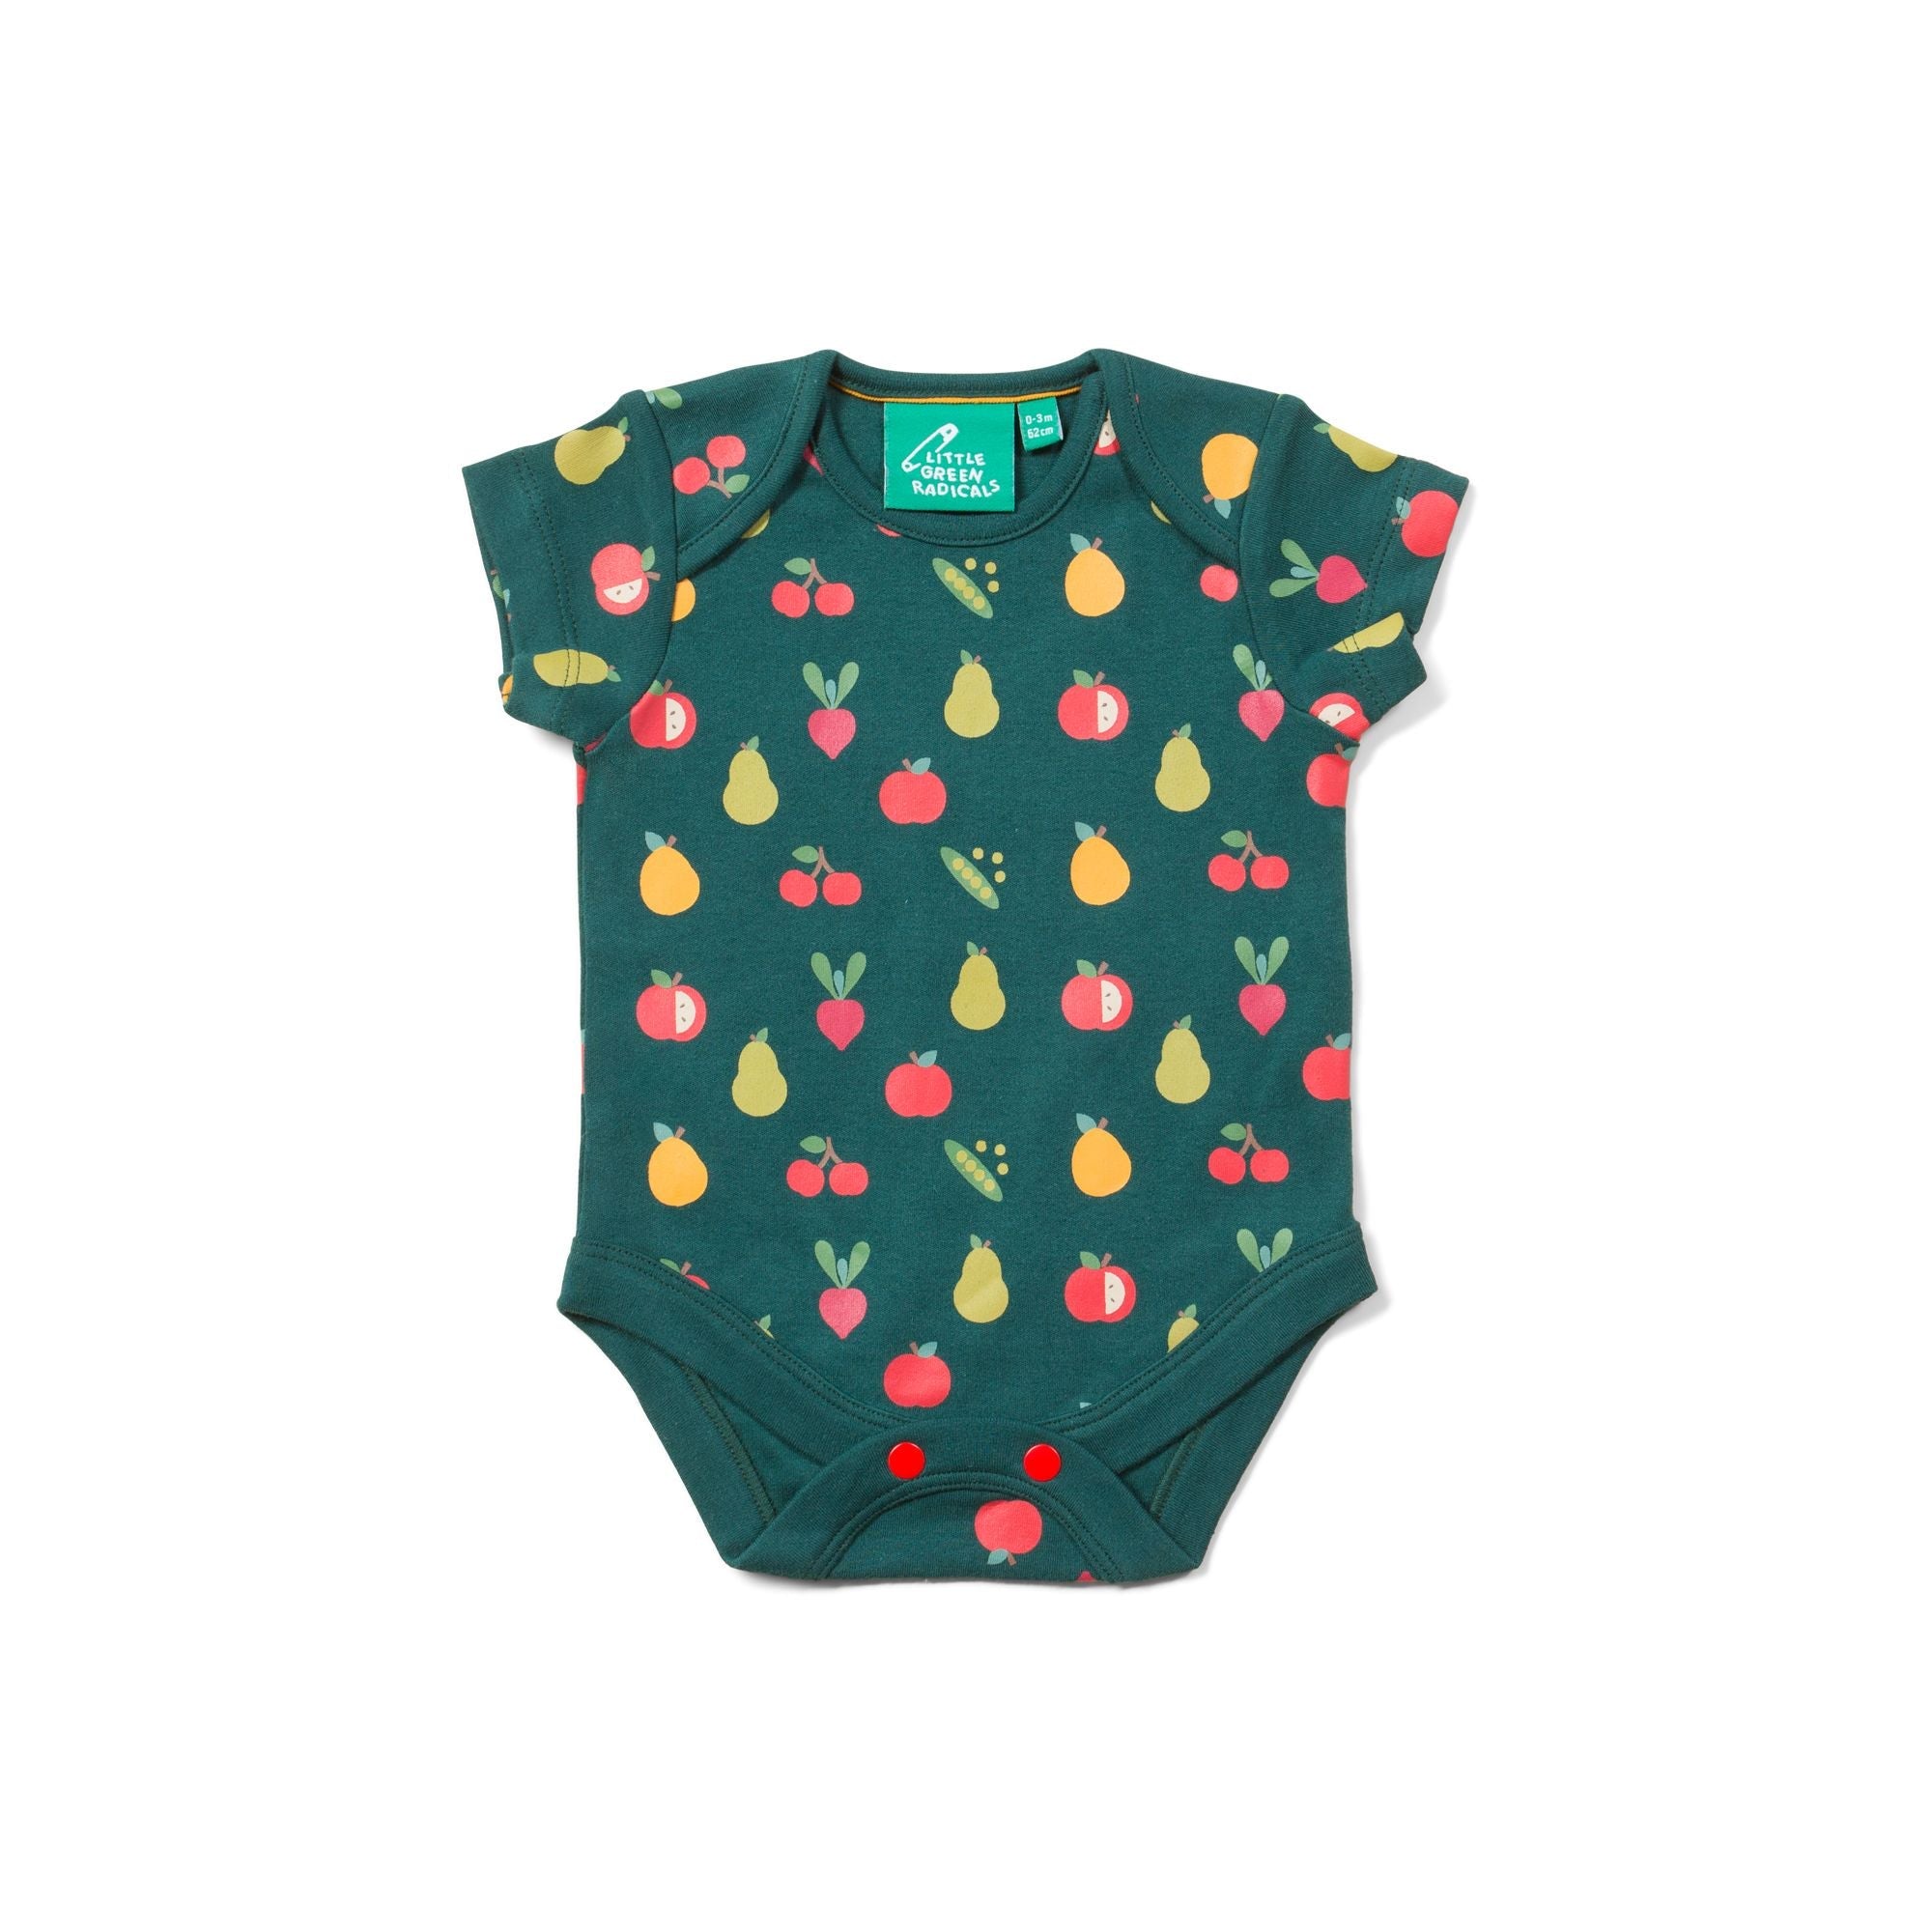 Vegetable Patch Organic Baby Onesie Set - 2 Pack by Little Green - Modern Rascals